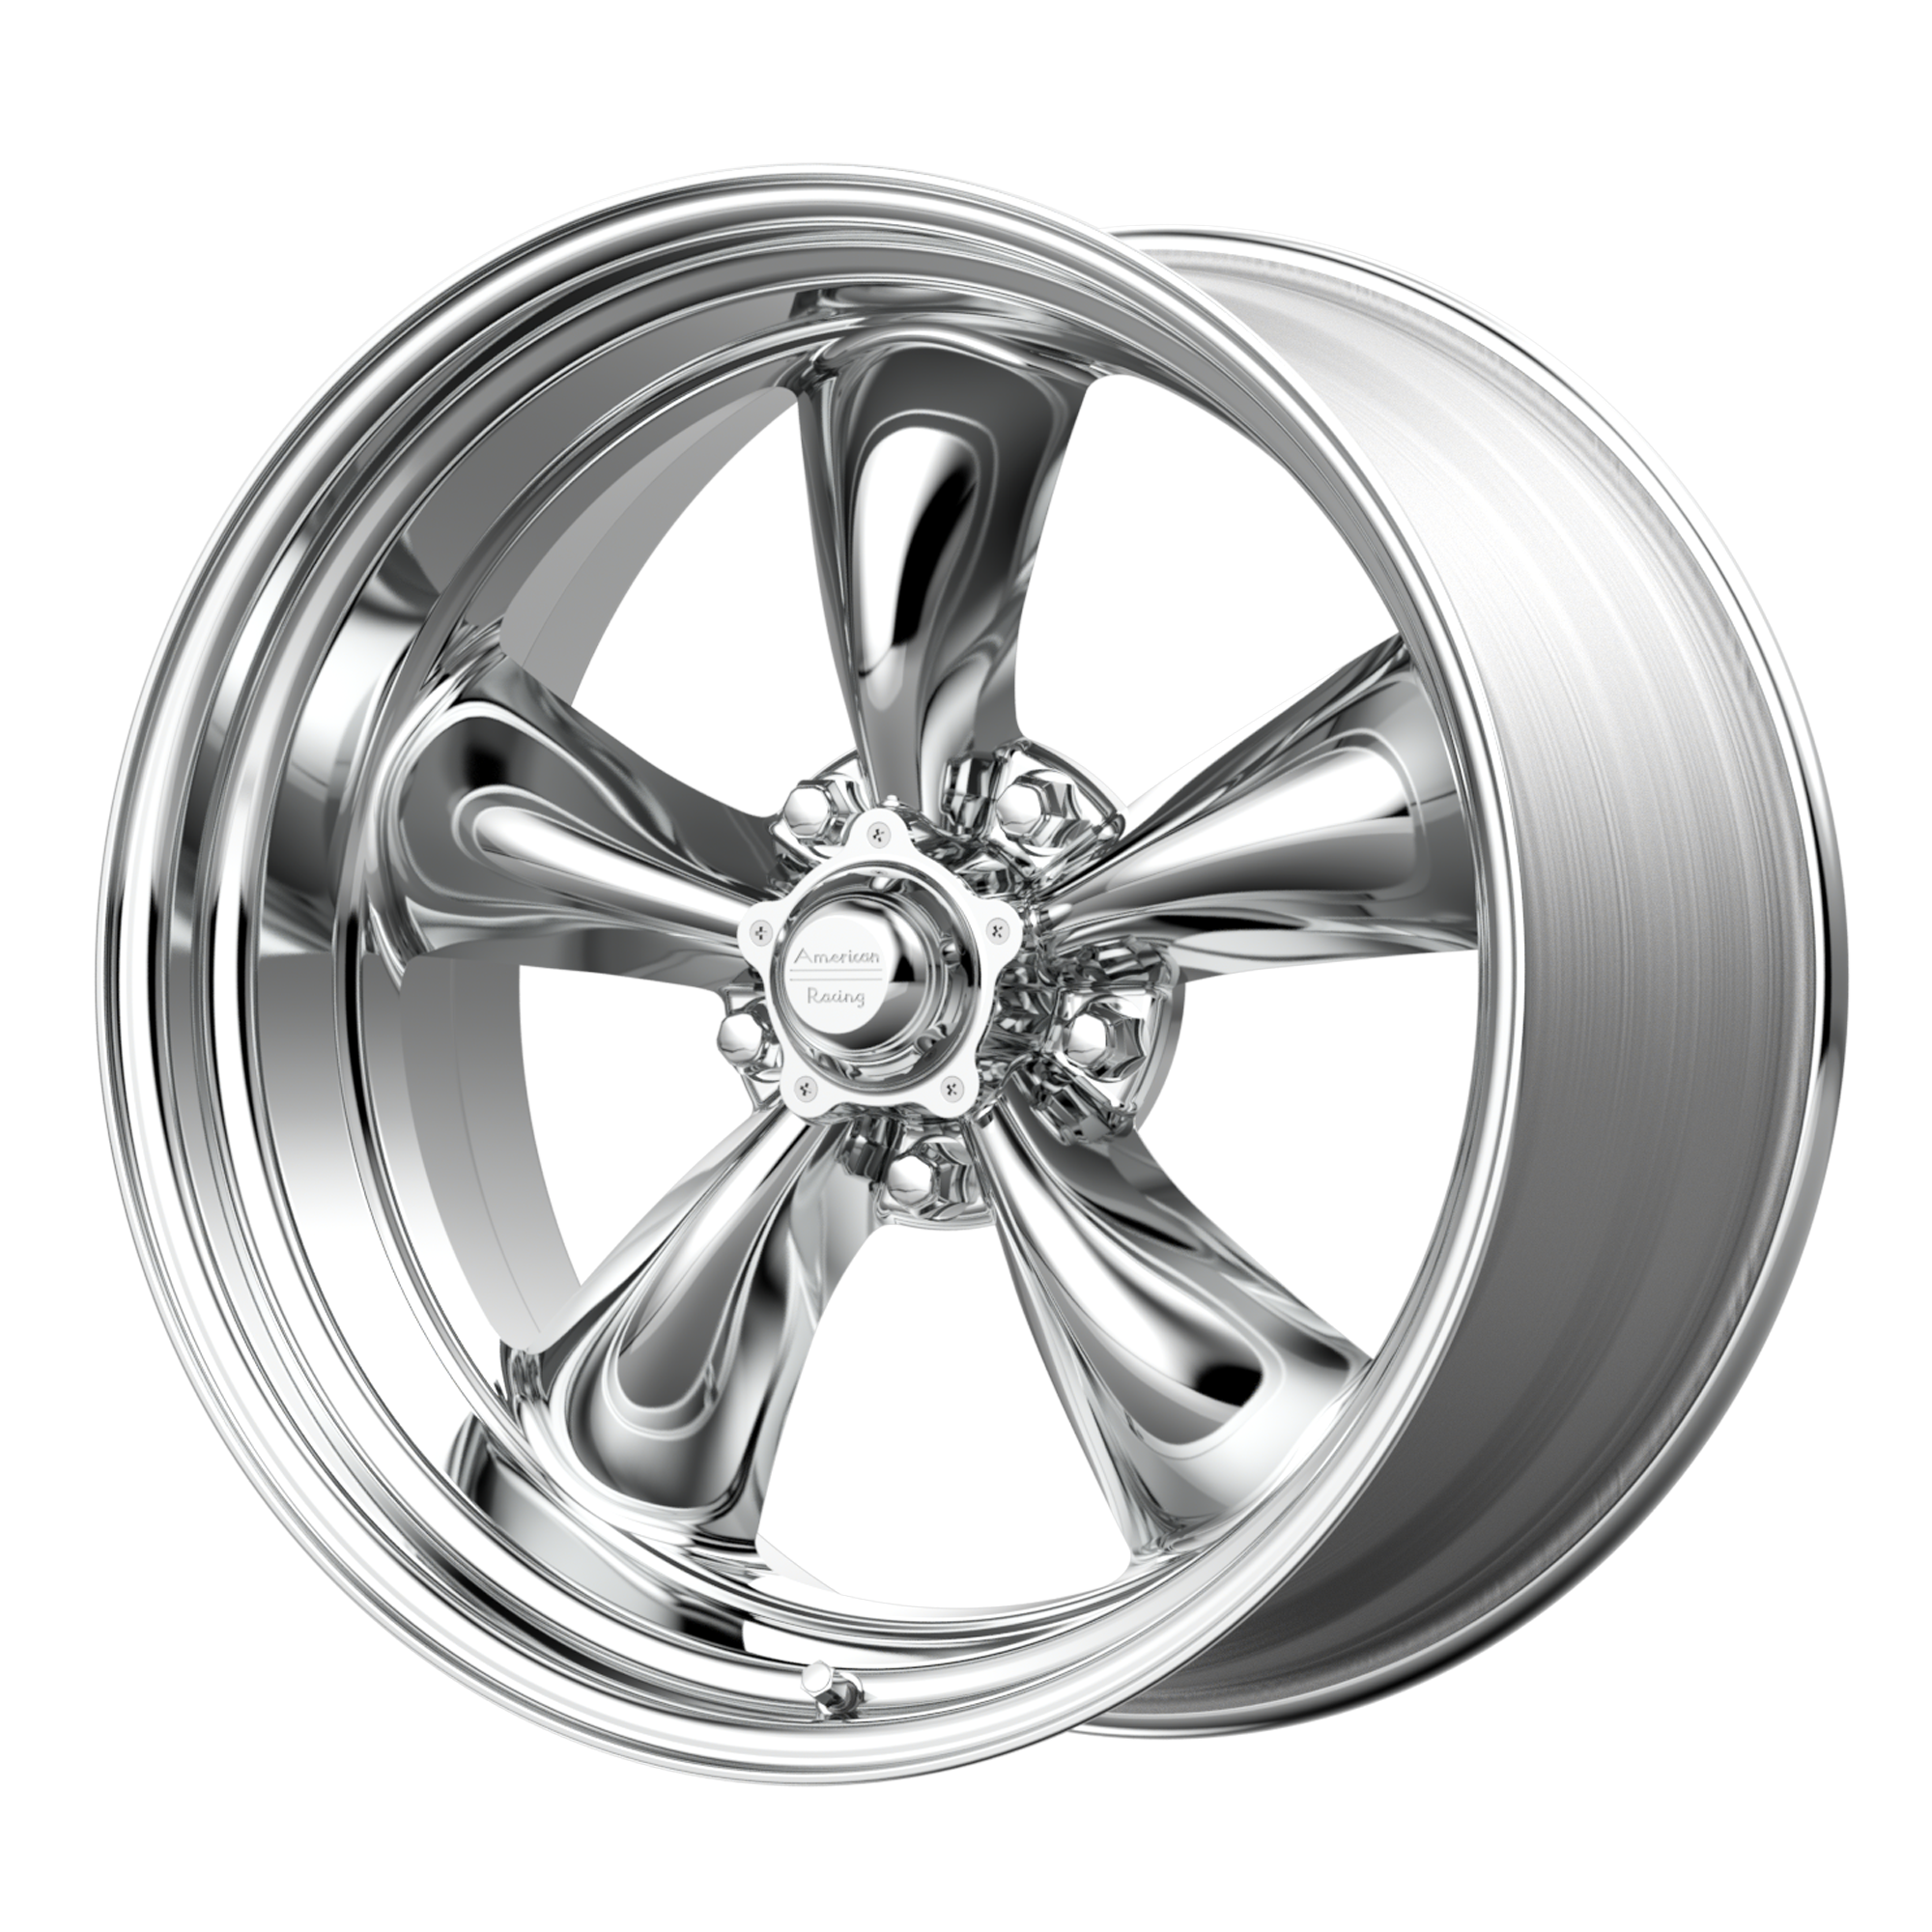 TORQ THRUST II 1 PC 17x8 5x127.00 POLISHED (14 mm) - Tires and Engine Performance